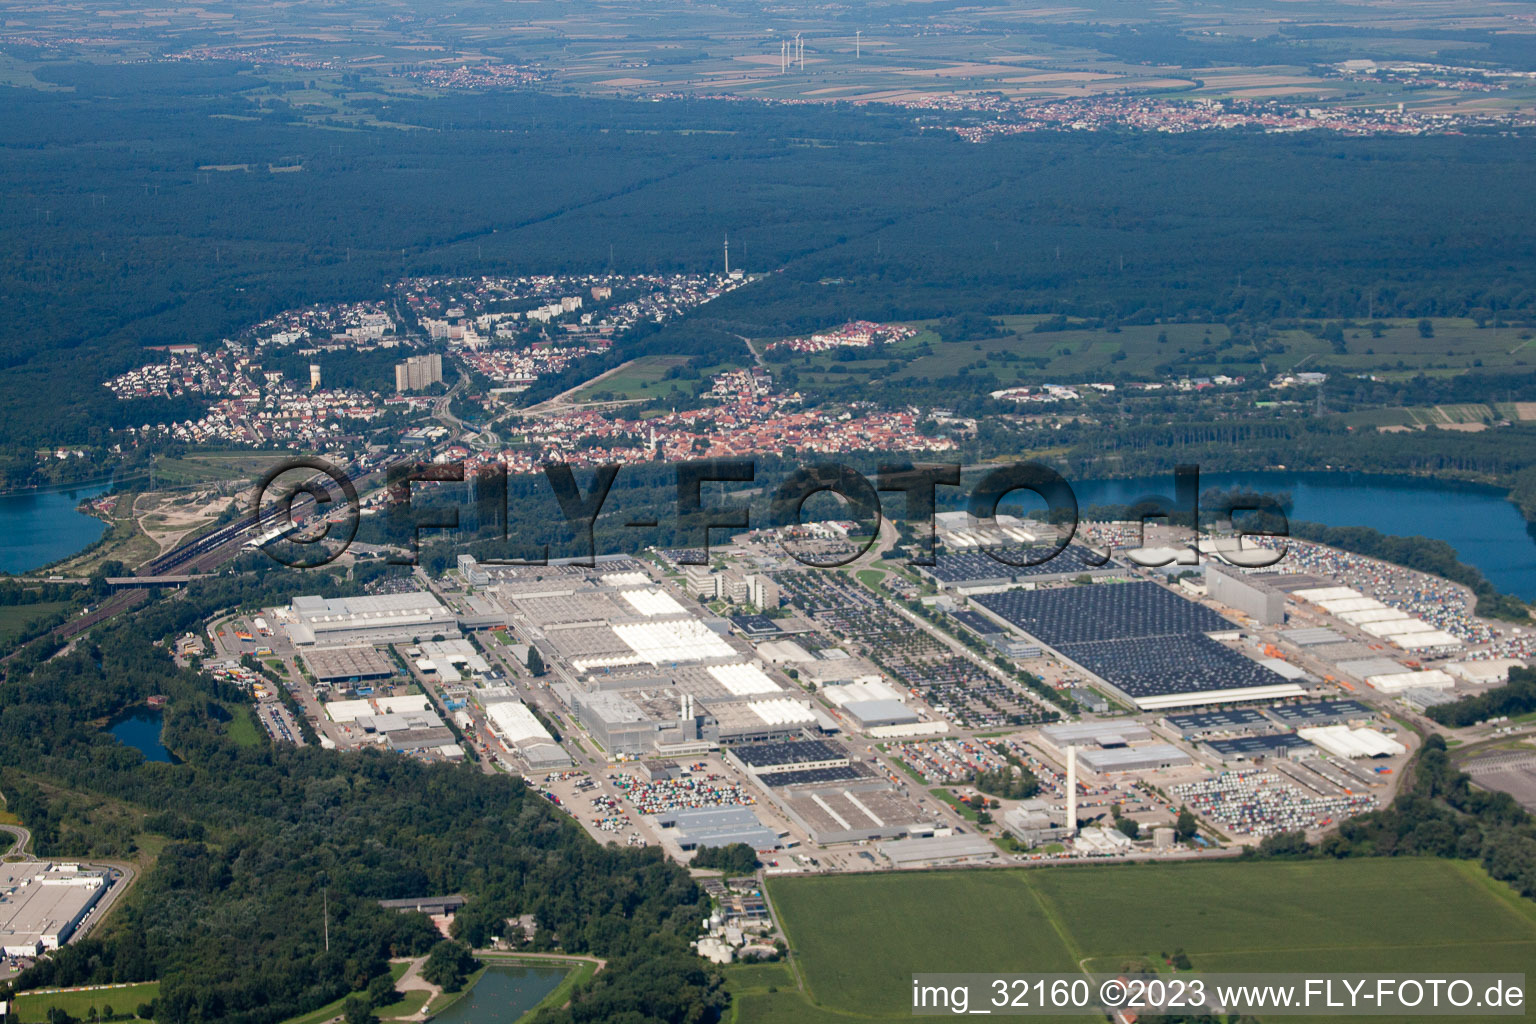 Daimler truck factory from the east in Wörth am Rhein in the state Rhineland-Palatinate, Germany